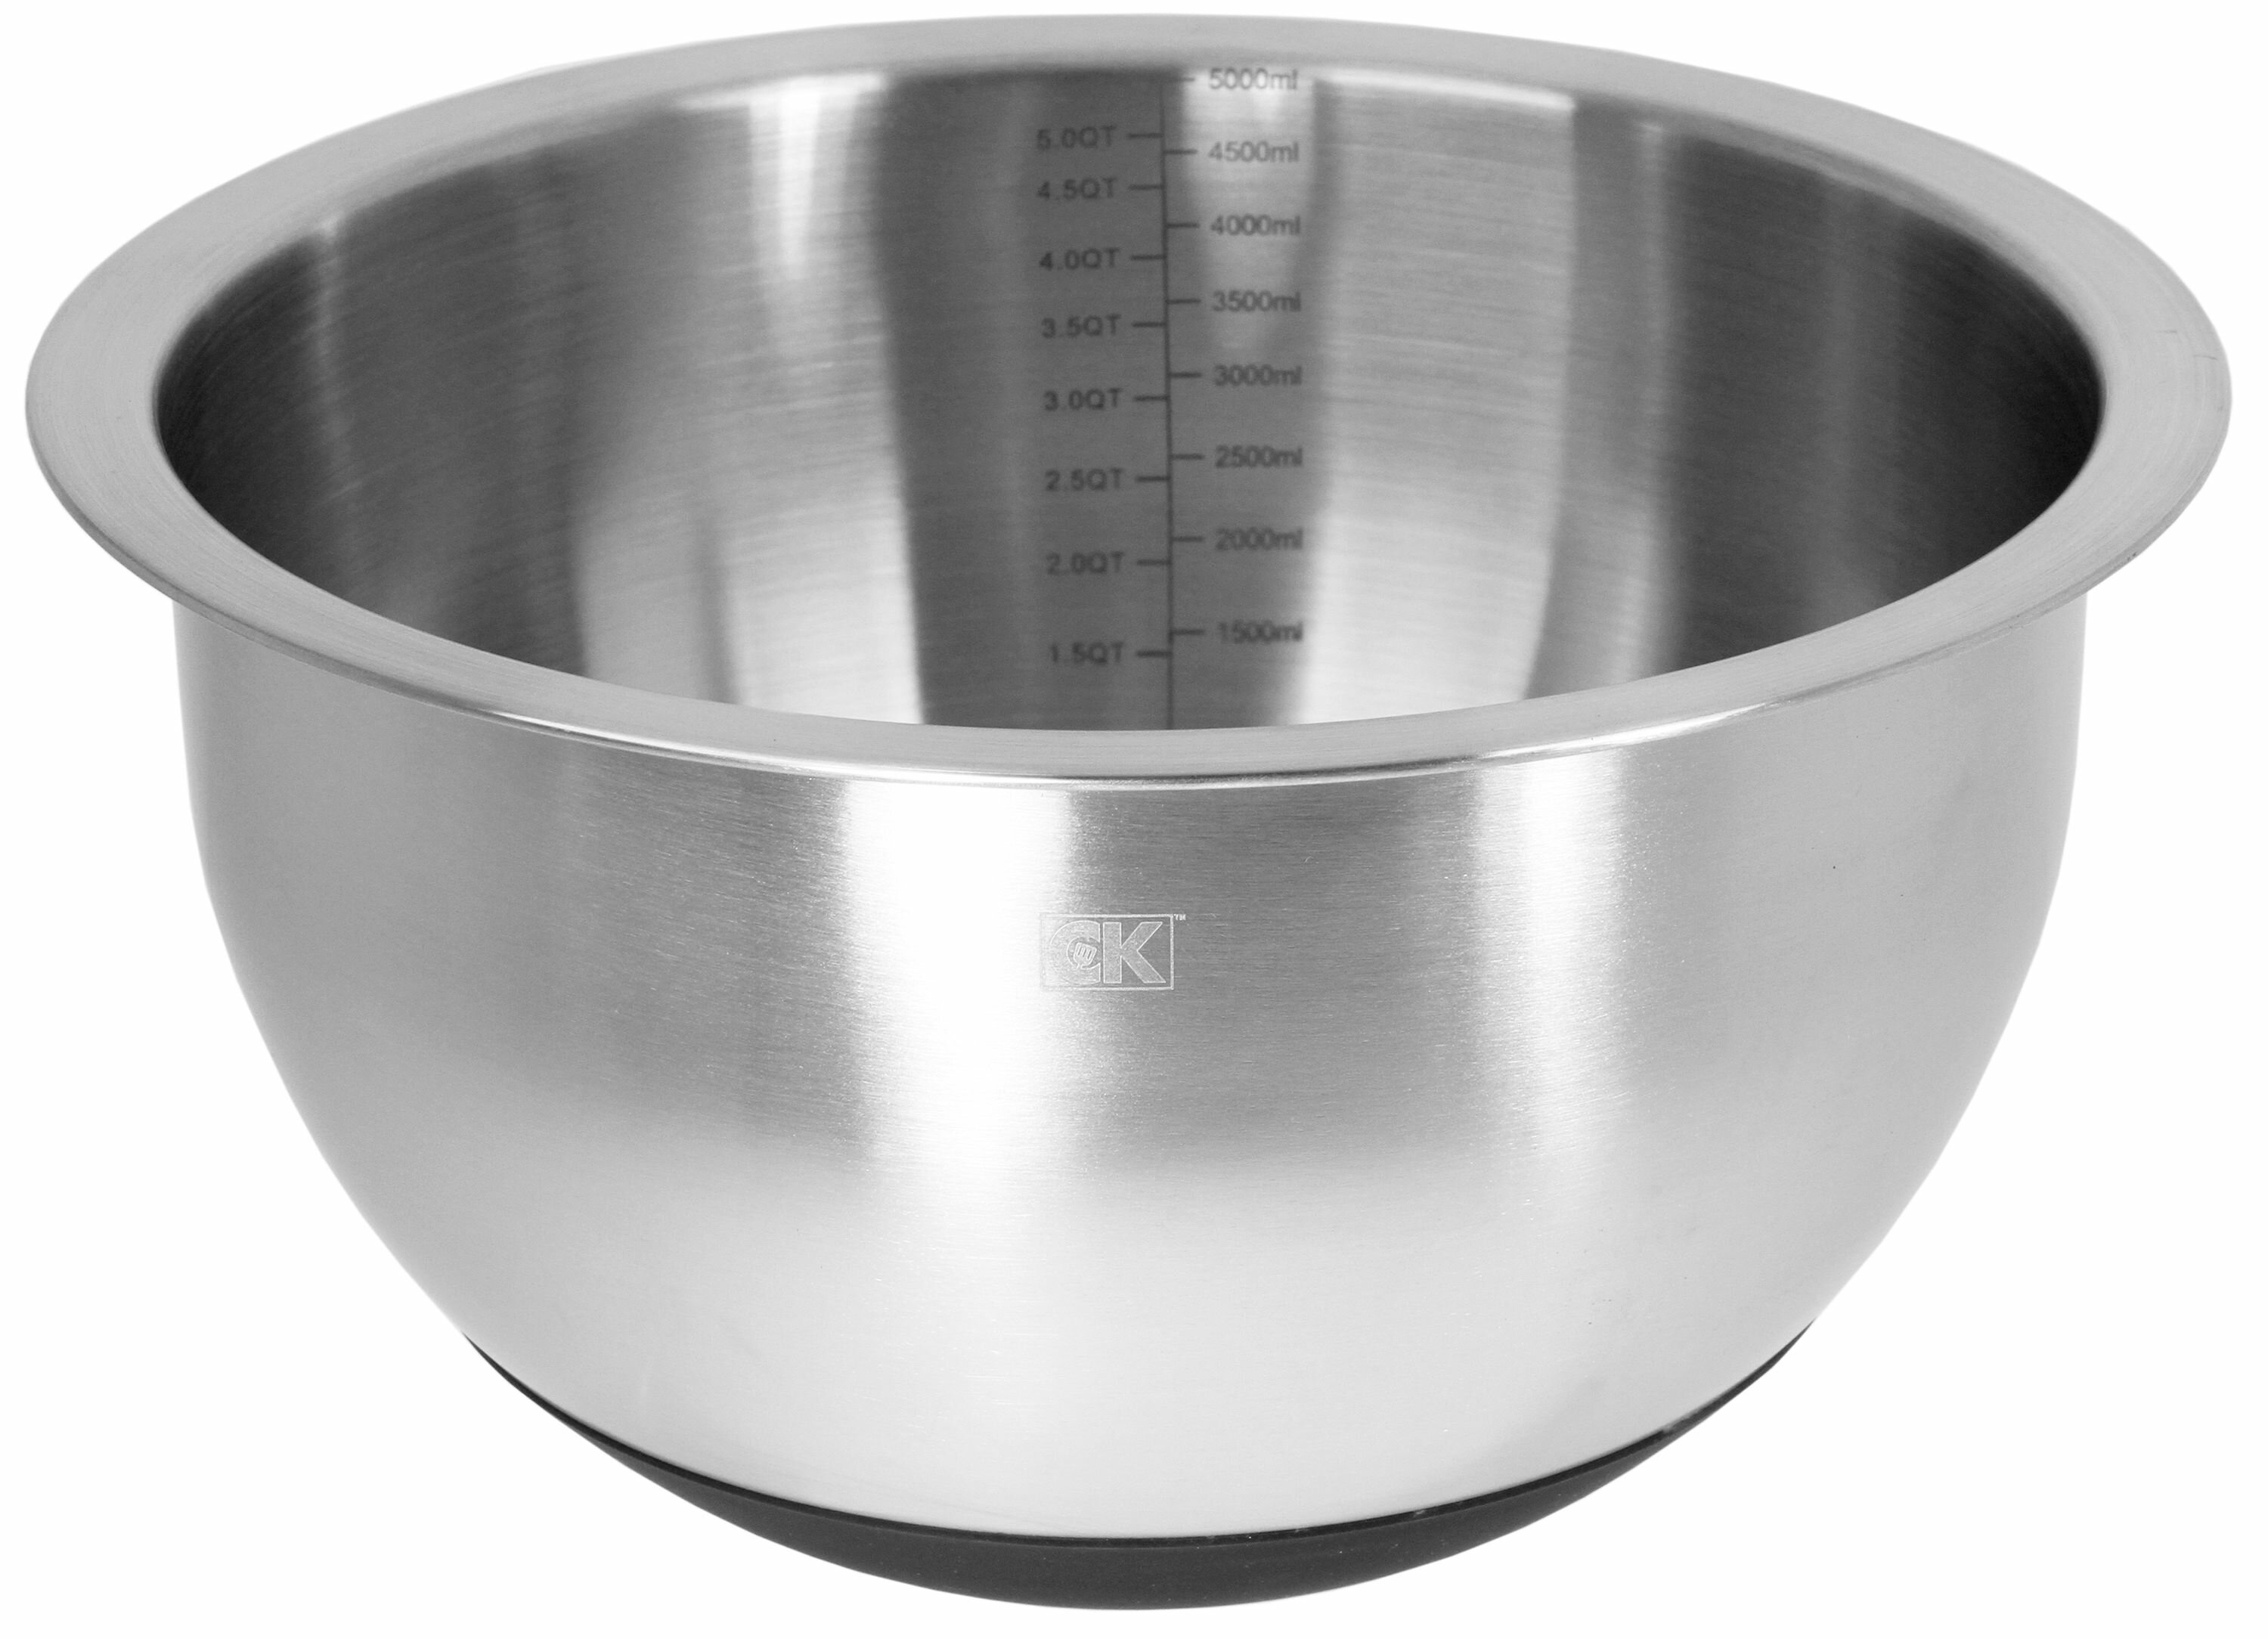 Ybmhome Heavy Duty Stainless Steel  Mixing Bowl for Baking Cooking Mixing